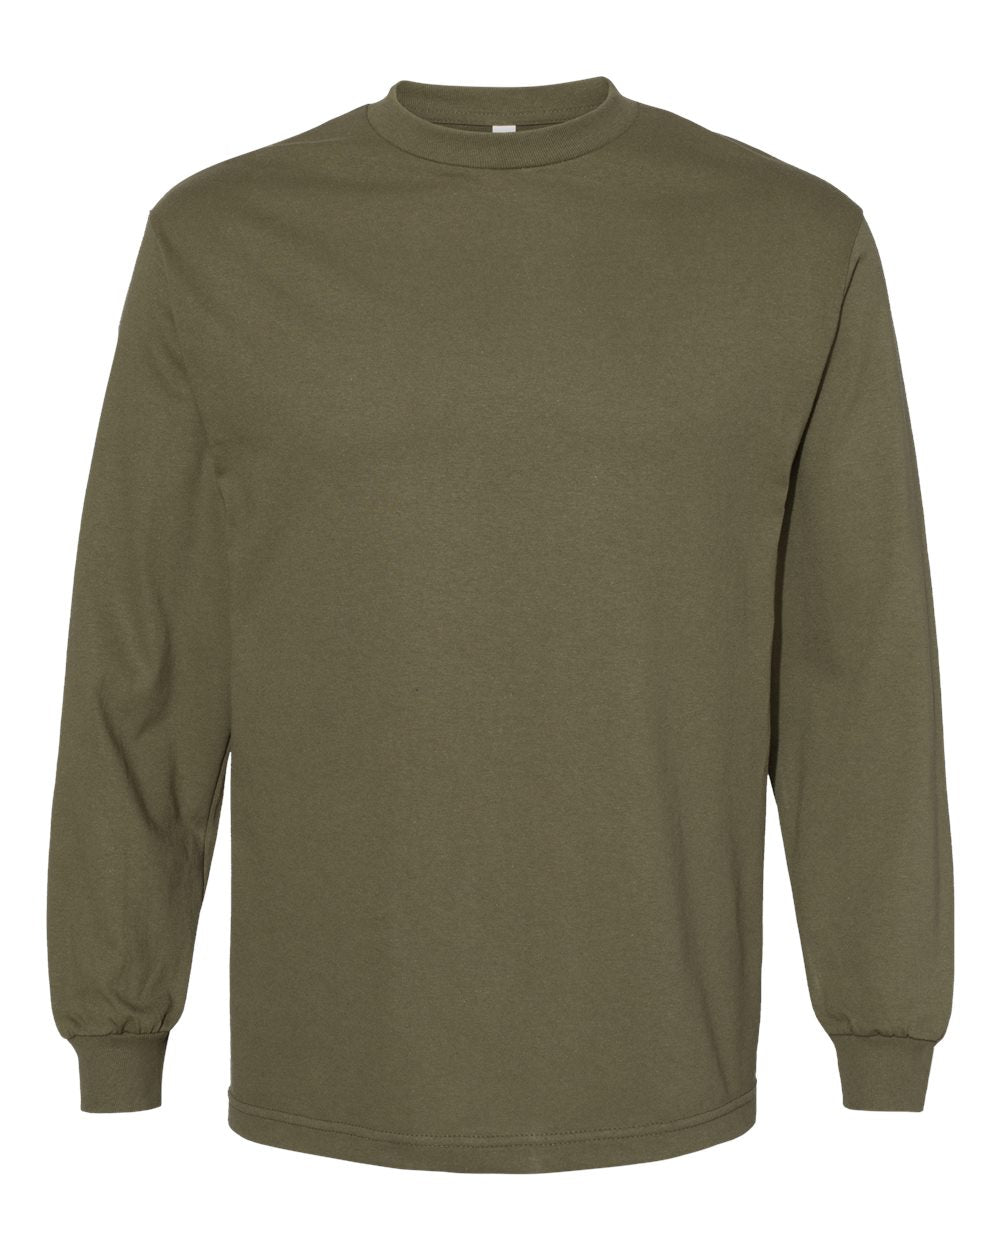 American Apparel Unisex Heavyweight Cotton Long Sleeve Tee 1304 #color_Military Green